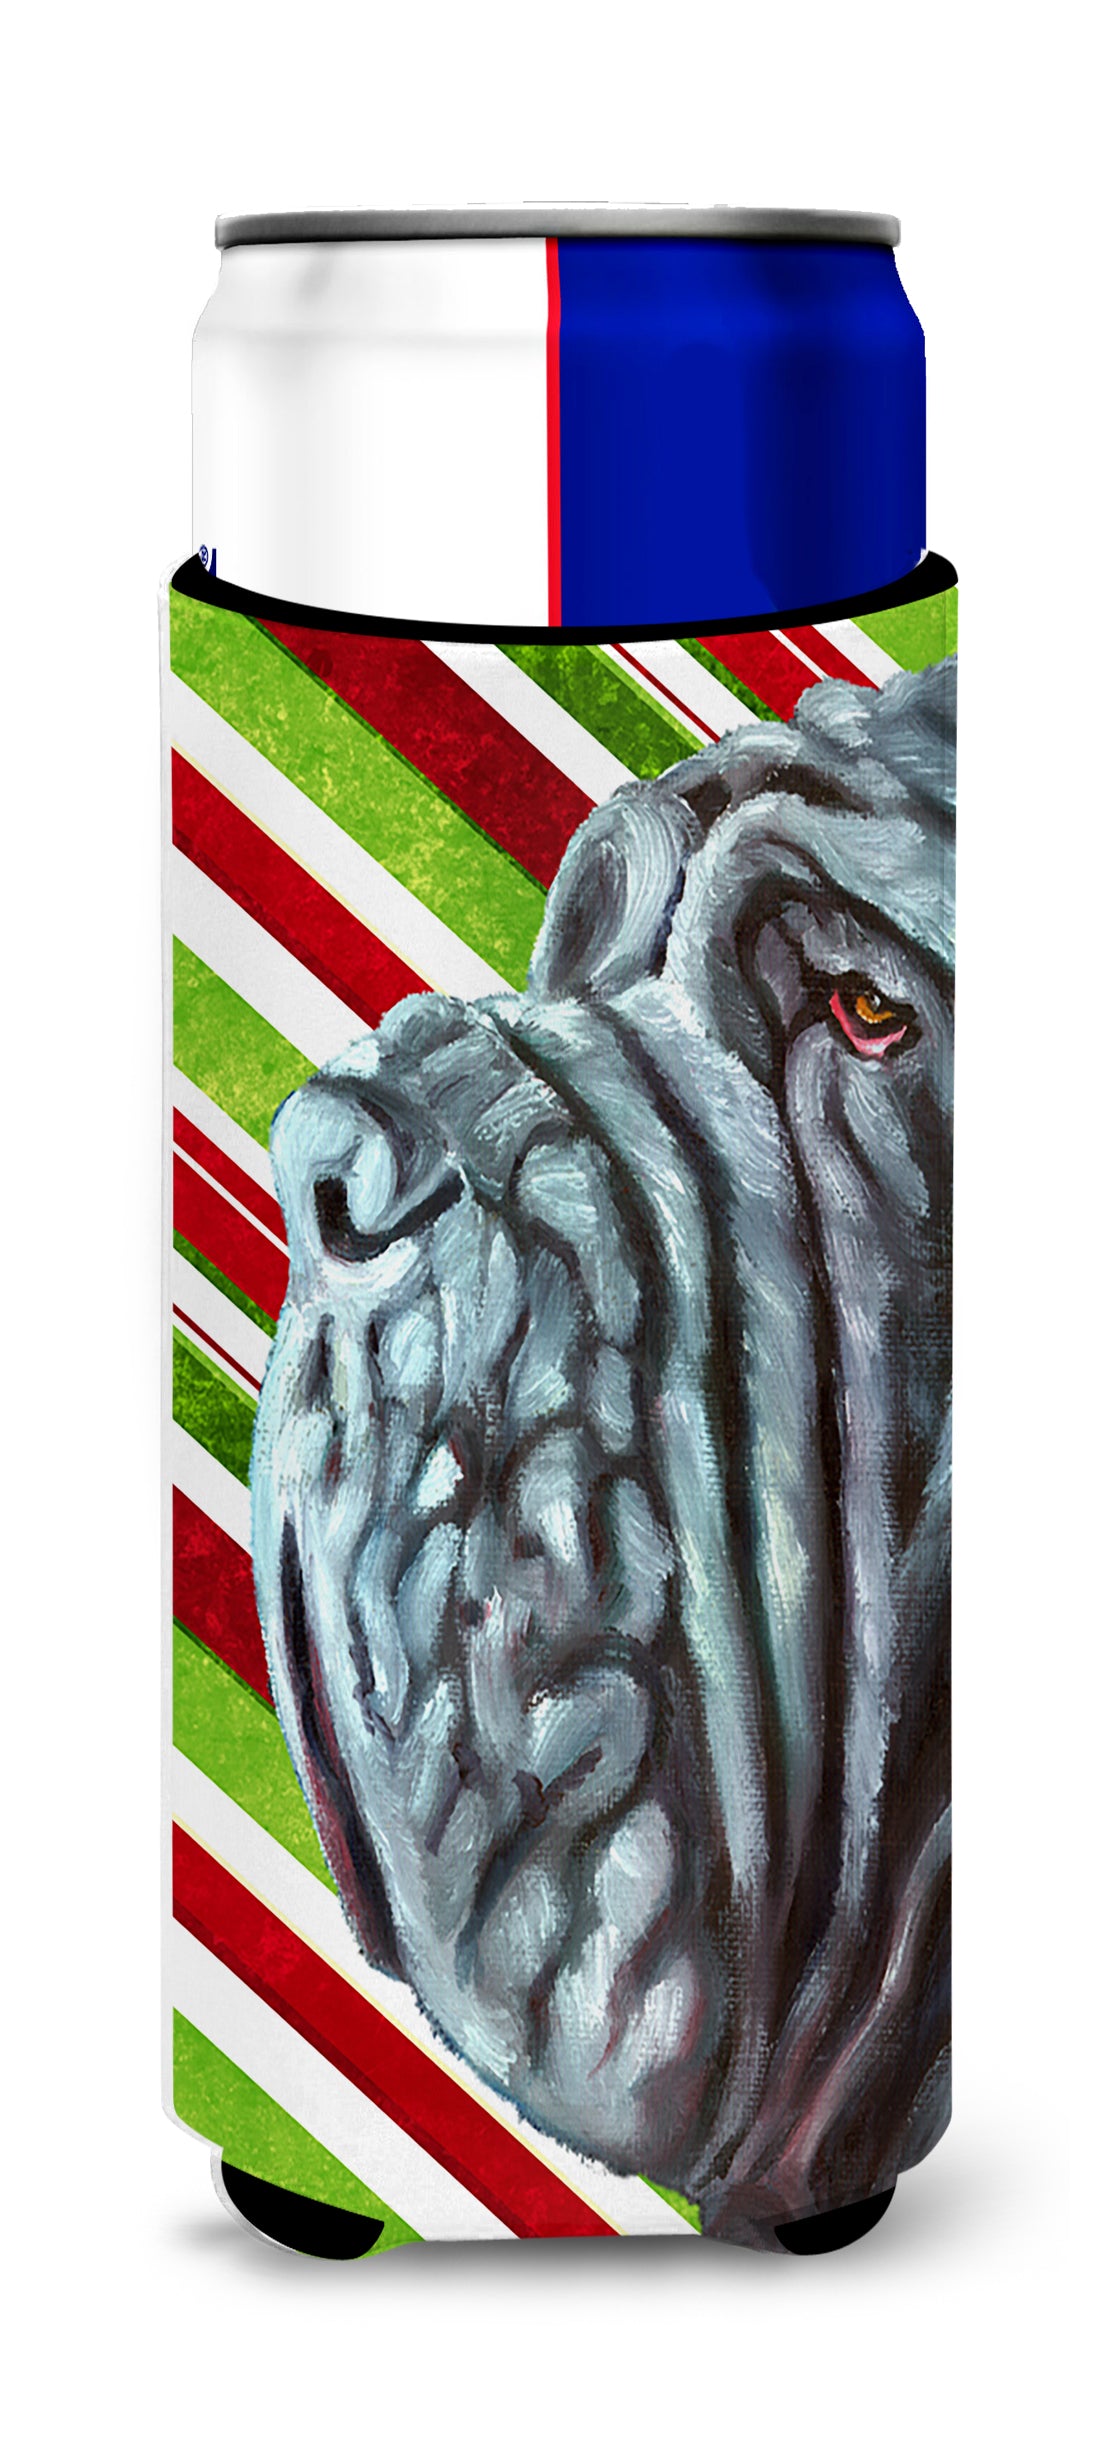 Neapolitan Mastiff Candy Cane Holiday Christmas Ultra Beverage Insulators for slim cans LH9589MUK